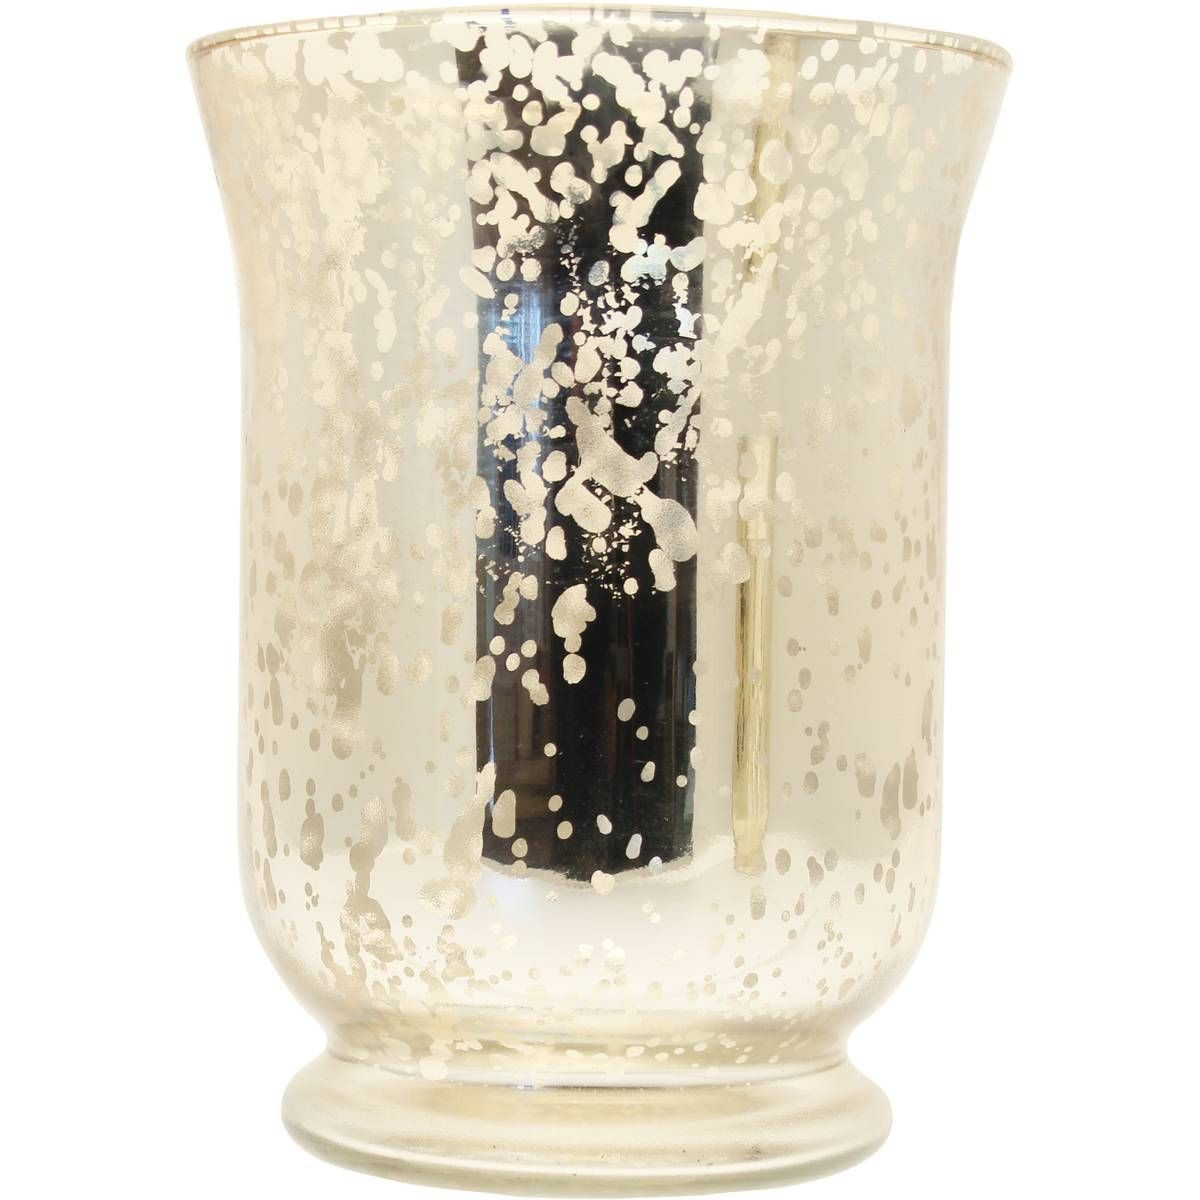 12 Perfect Hurricane Vases for Centerpieces 2024 free download hurricane vases for centerpieces of hurricane vases centerpieces images antique champagne speckle with regard to hurricane vases centerpieces images antique champagne speckle hurricane vase 